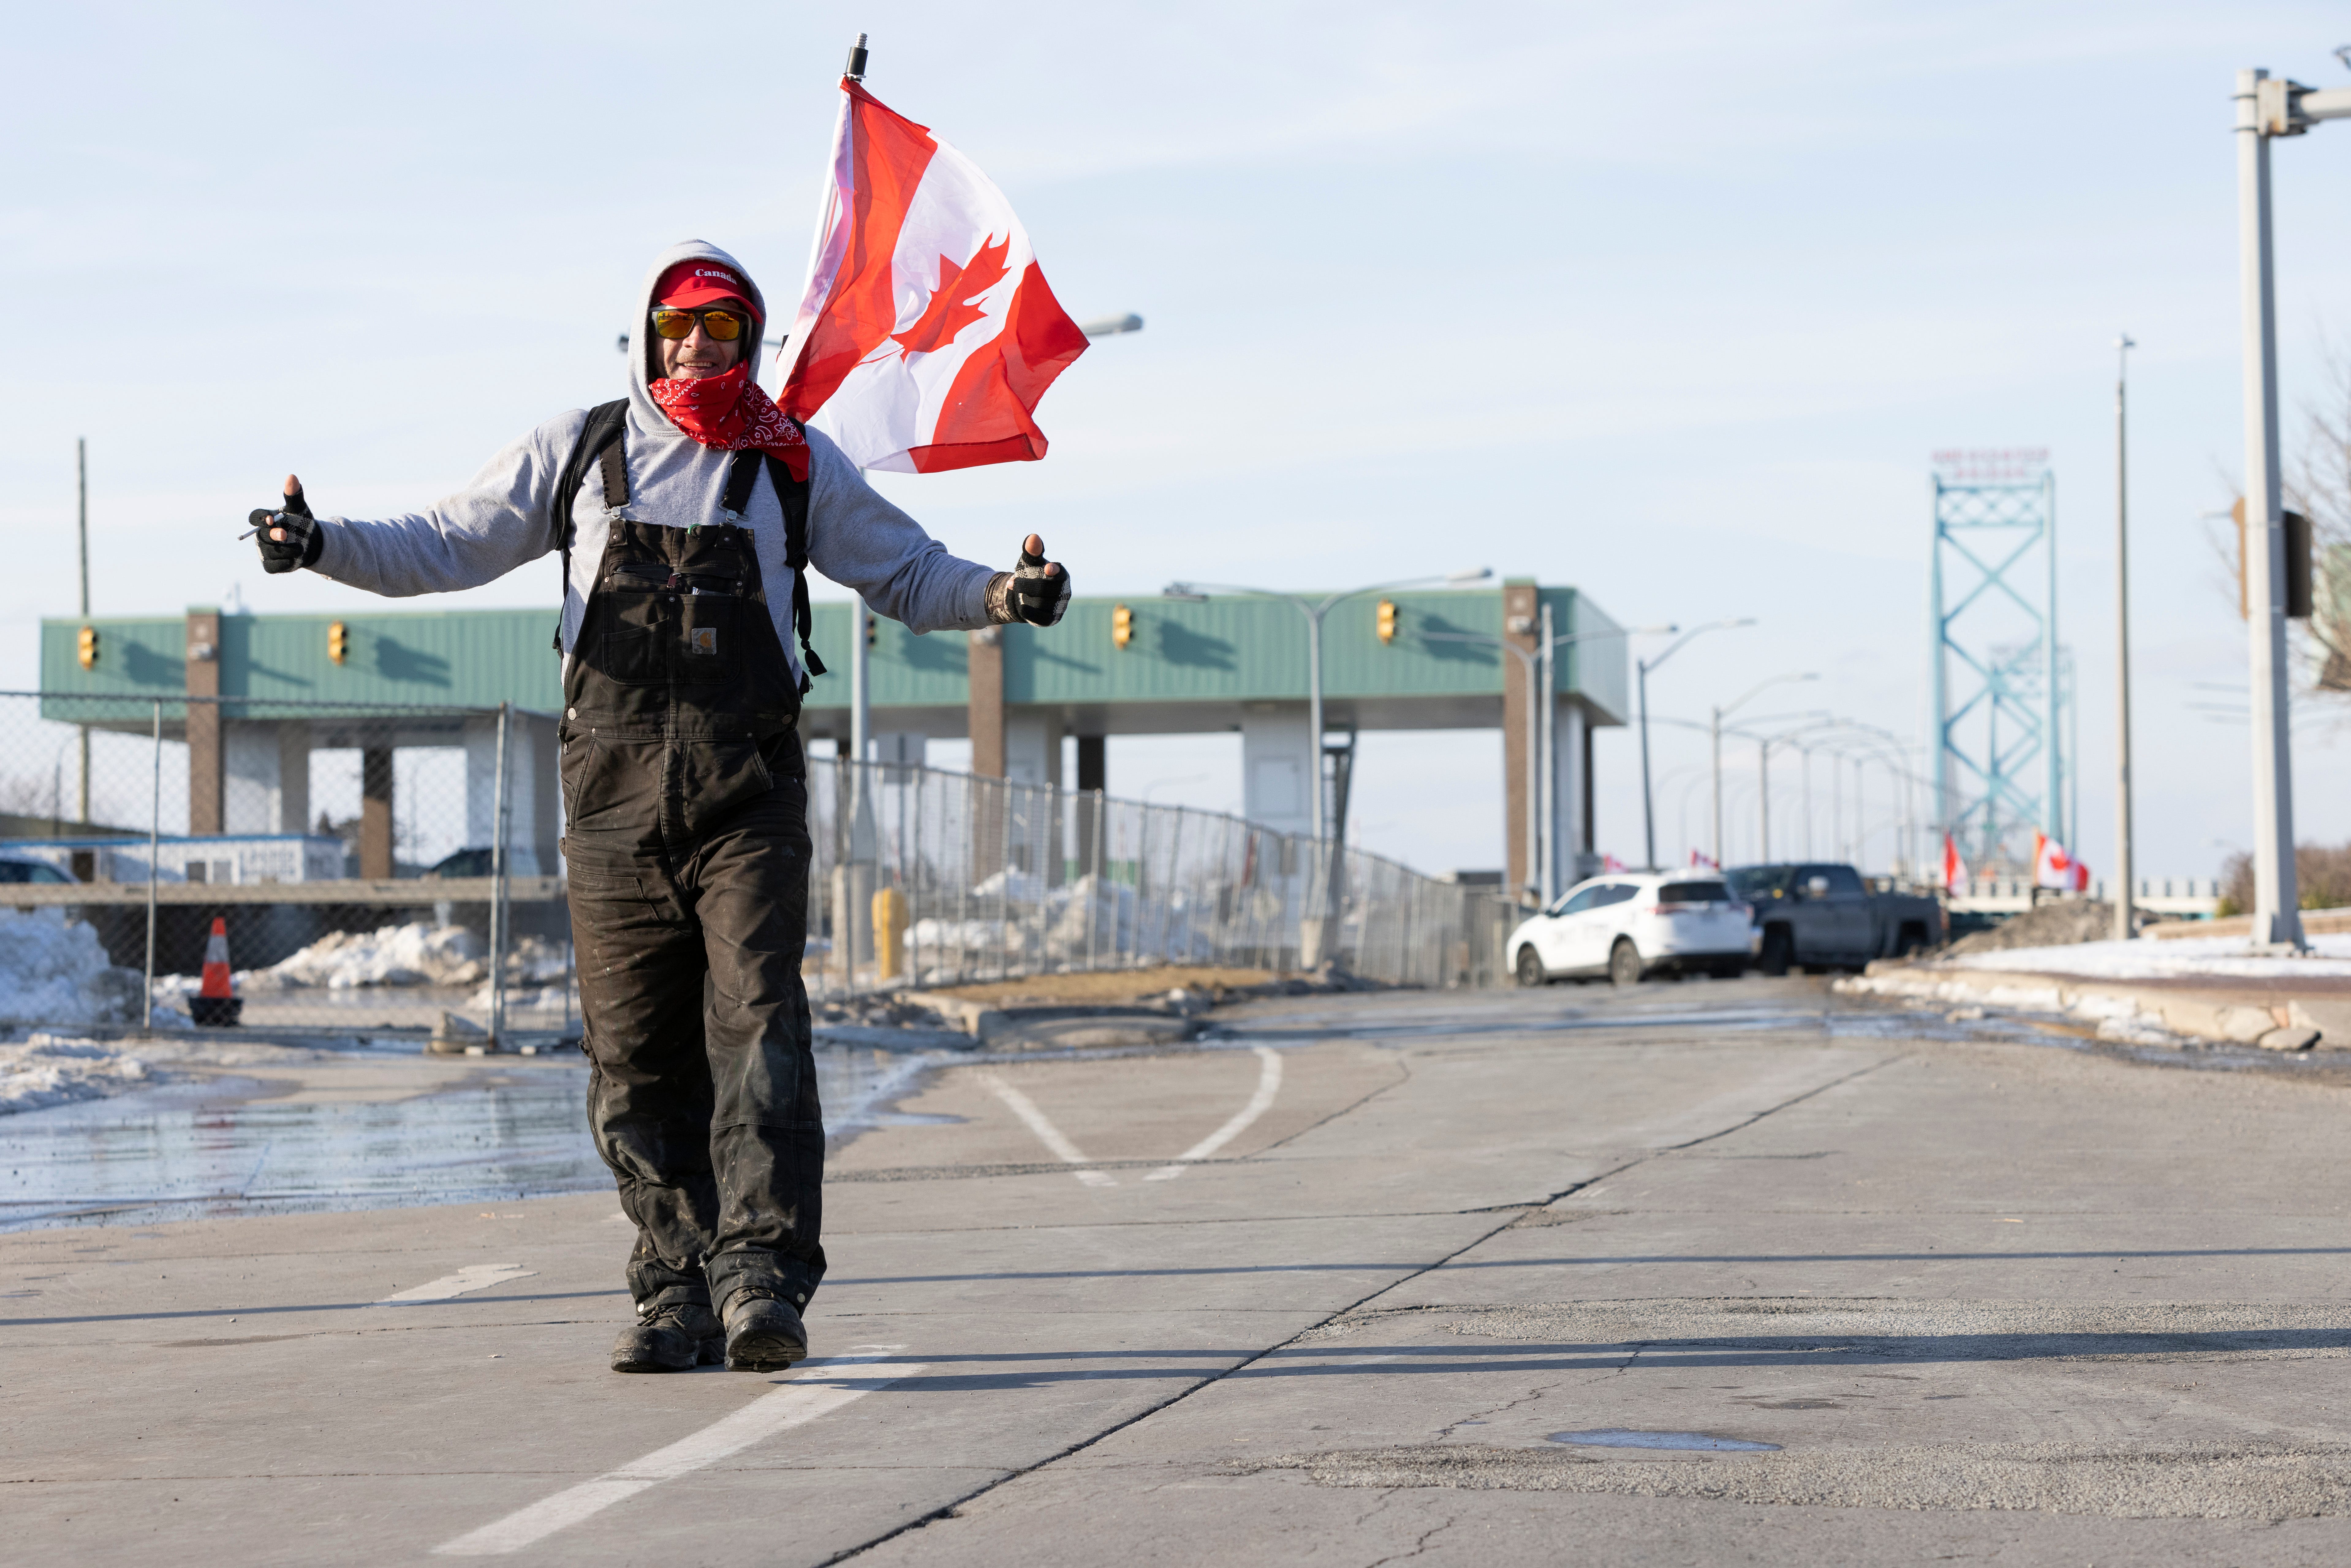 A man takes part in a protest blocking traffic at the Ambassador Bridge, linking Windsor, Ontario and Detroit on Wednesday, Feb. 9, 2022. The demonstration in solidarity with protests in Ottawa against COVID-19 restrictions has blocked traffic into Canada on the Ambassador Bridge linking Windsor and Detroit since Monday and is the the single busiest commercial crossing in North America.